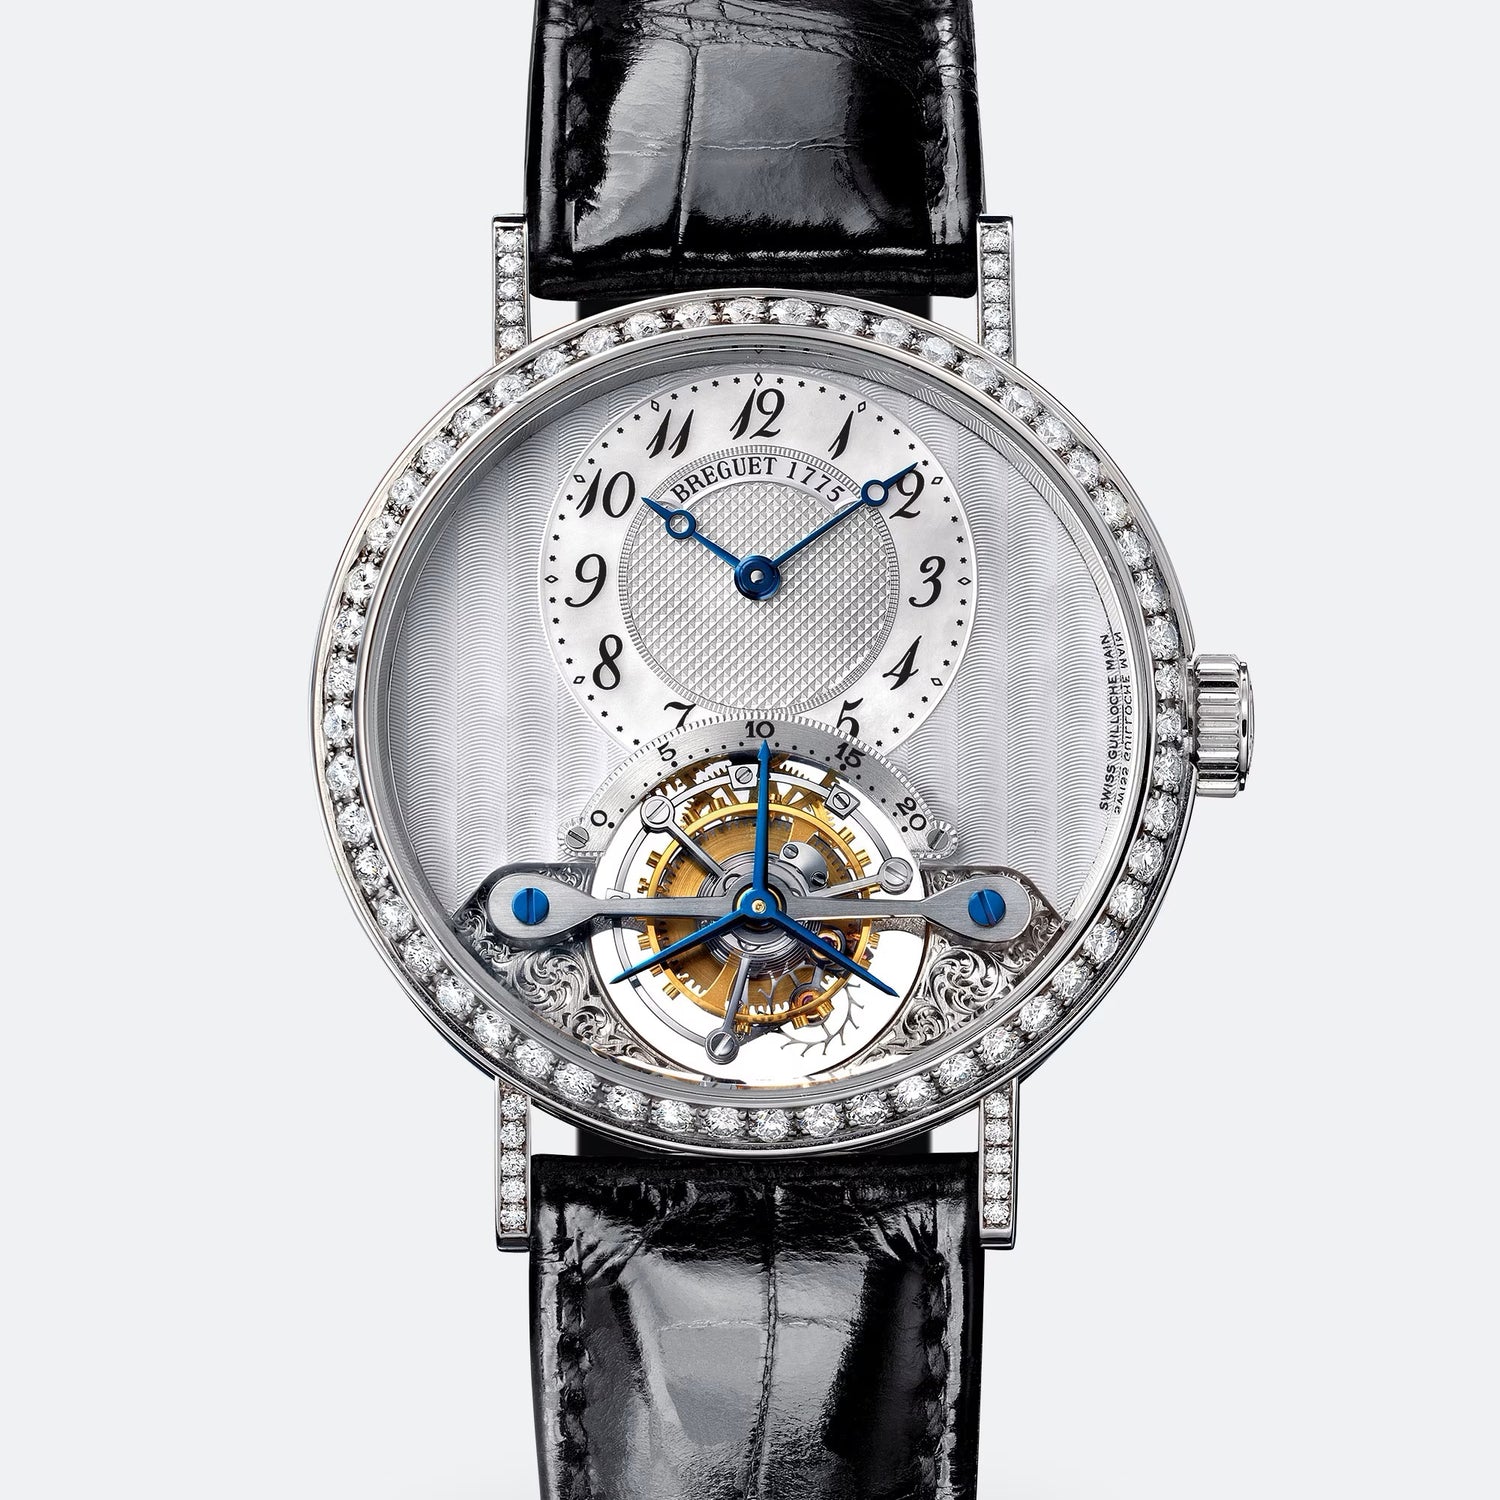 7 Best 100k Dollars Watches in 2023 : Timeless Beauty